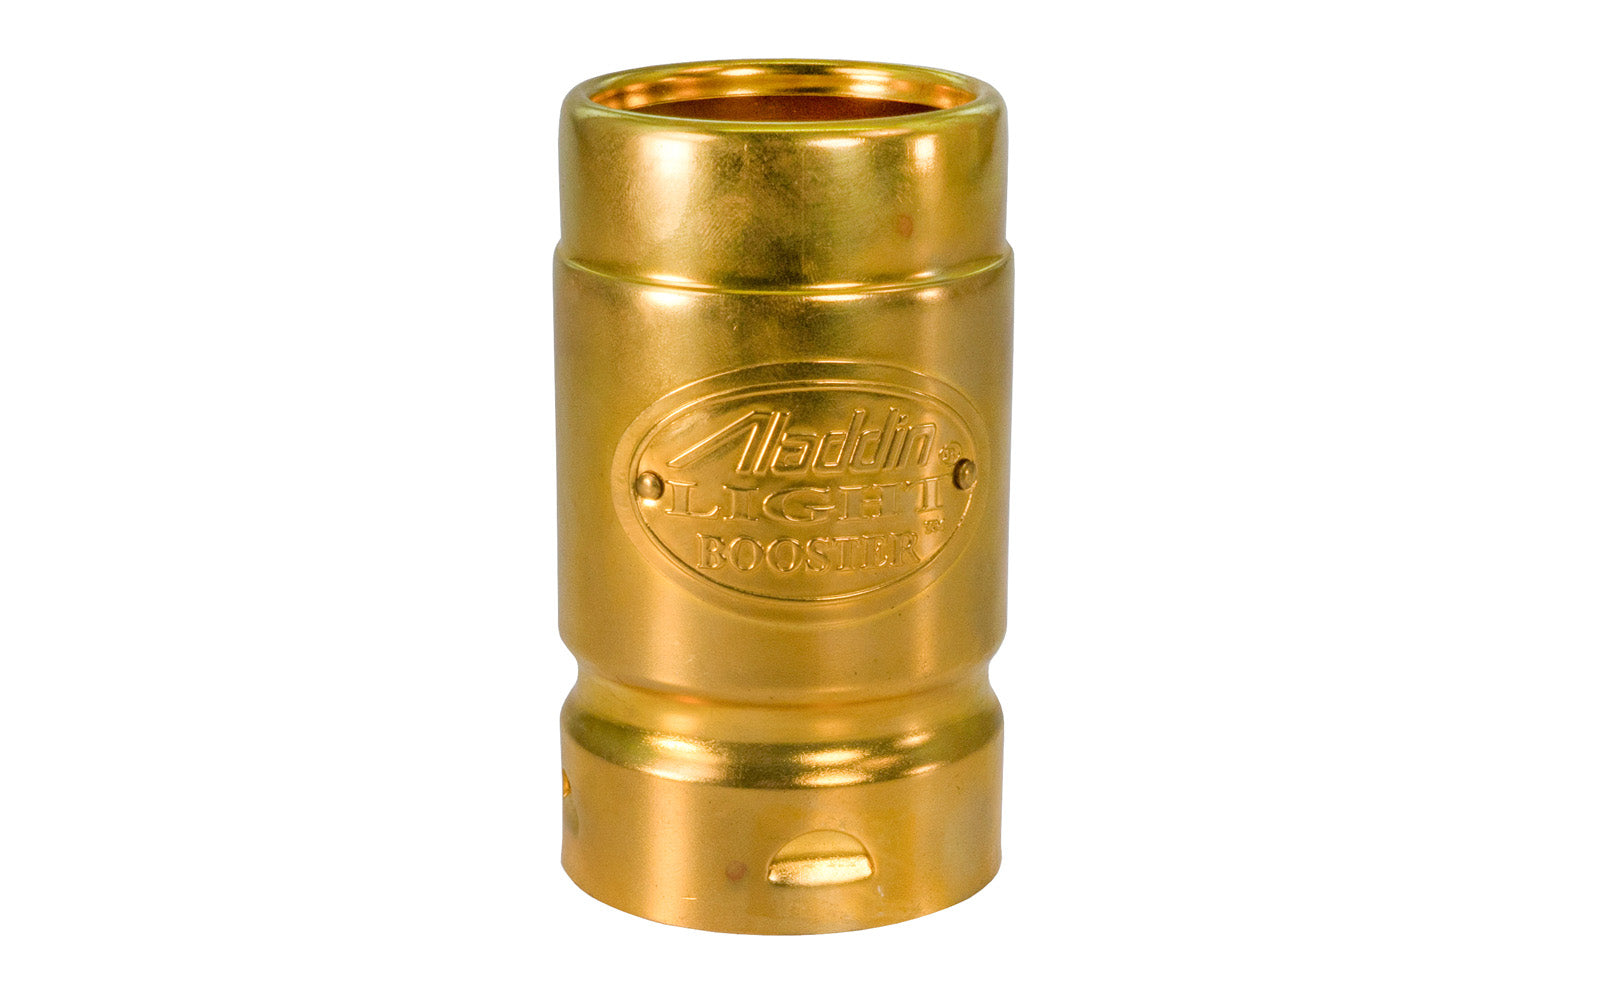 Solid Brass Light Booster Model N108B made by the Aladdin Mantle Lamp Company. Fits all chimneys with 1-1/4" OD top opening.  